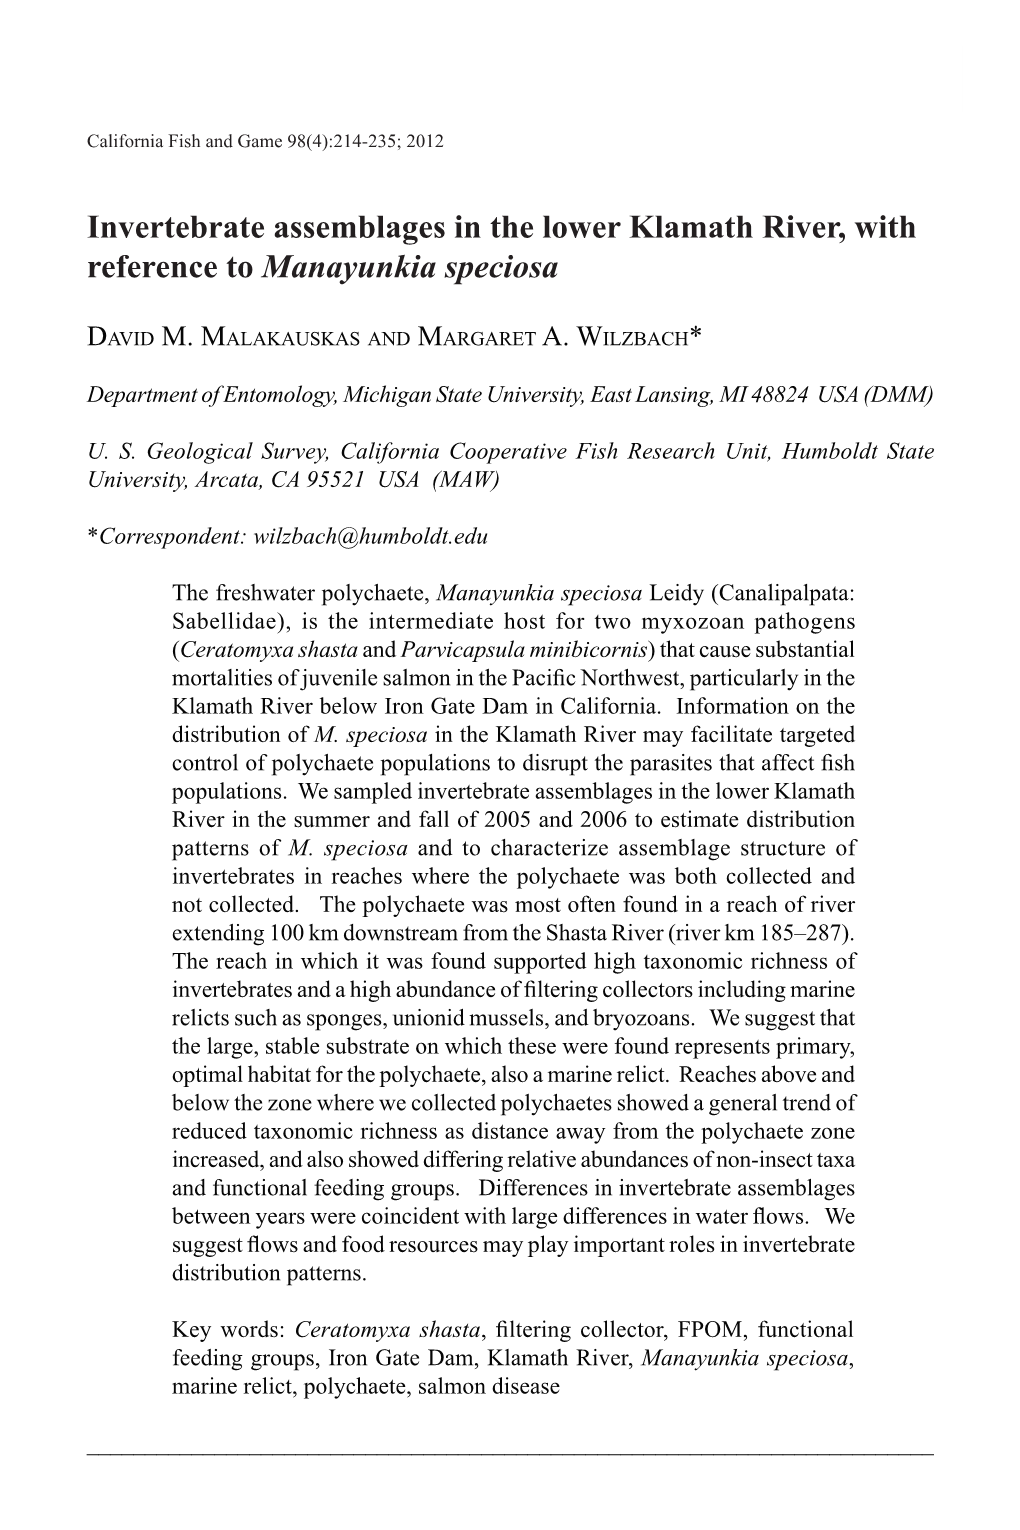 Invertebrate Assemblages in the Lower Klamath River, with Reference to Manayunkia Speciosa